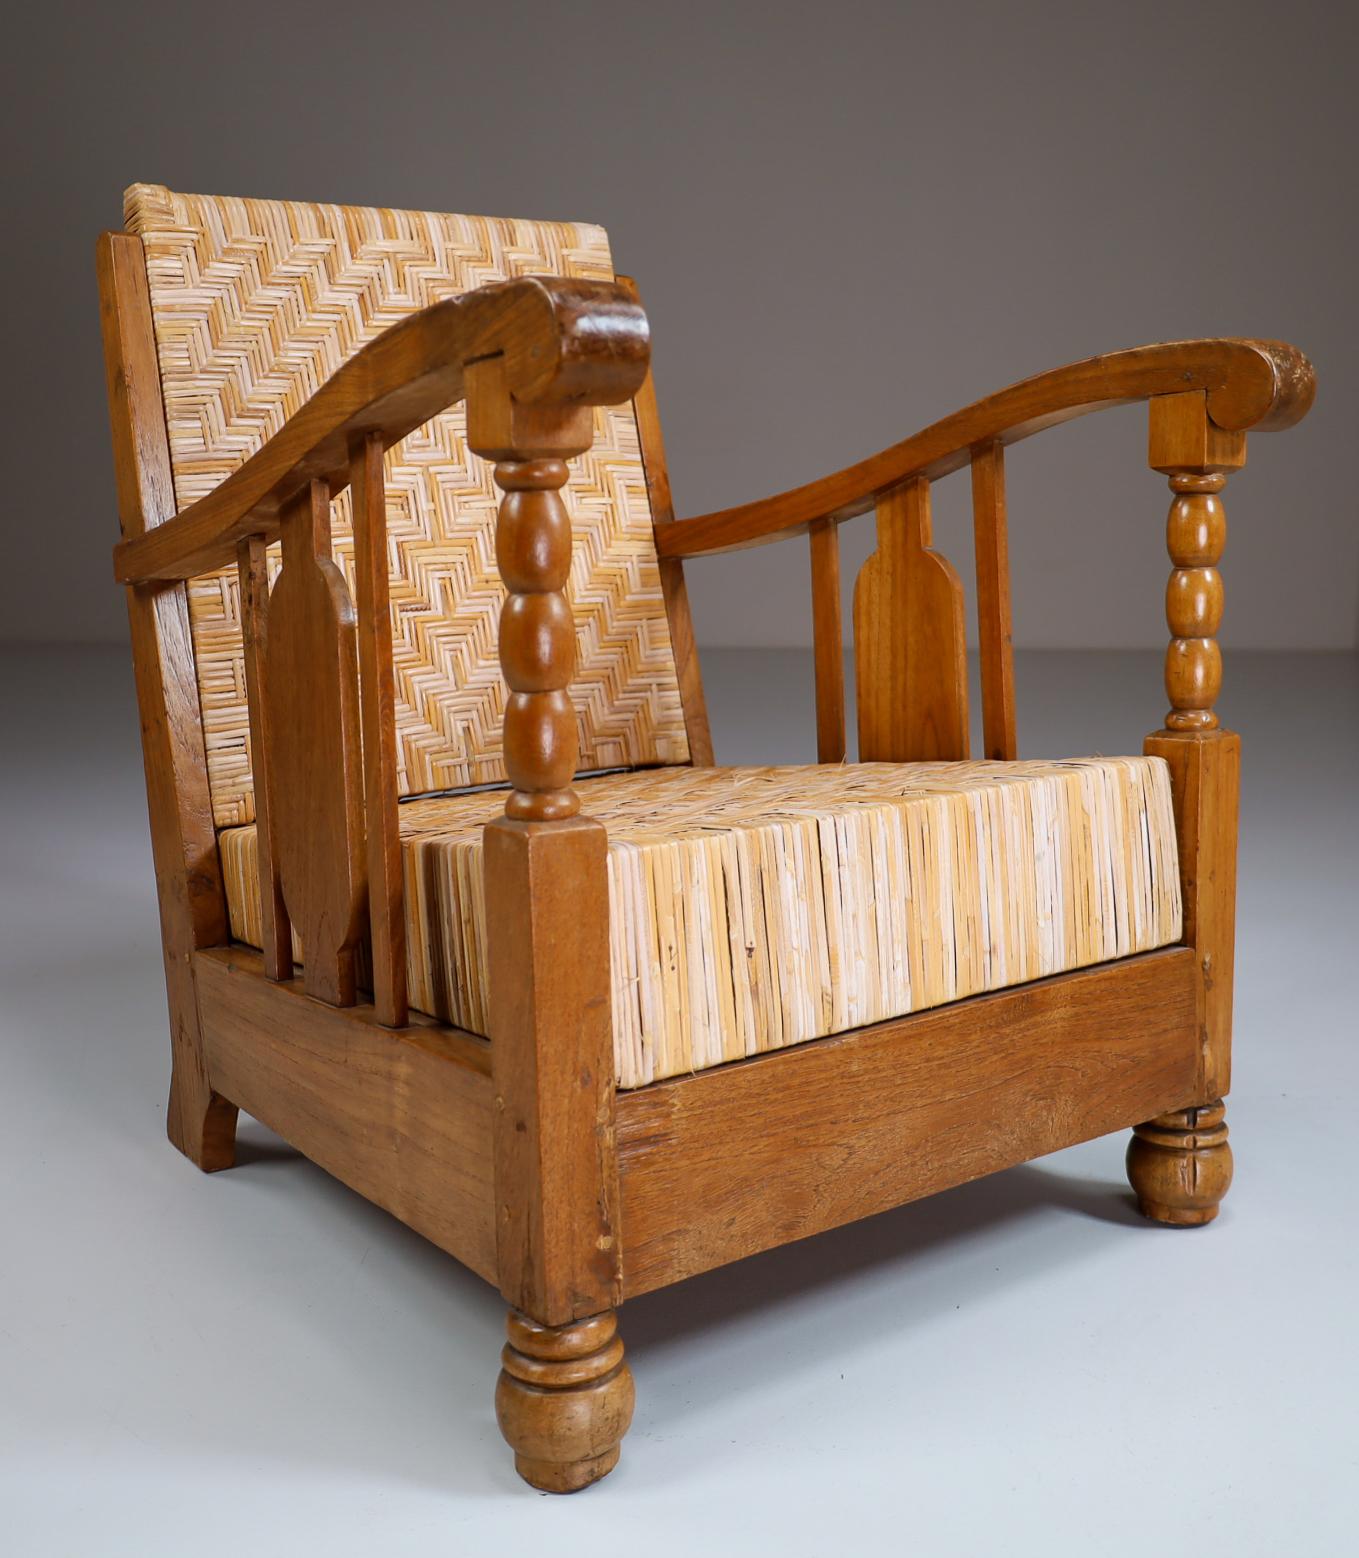 Indian British Colonial Rattan And Wood Art Deco Lounge Chair, India 1920s For Sale